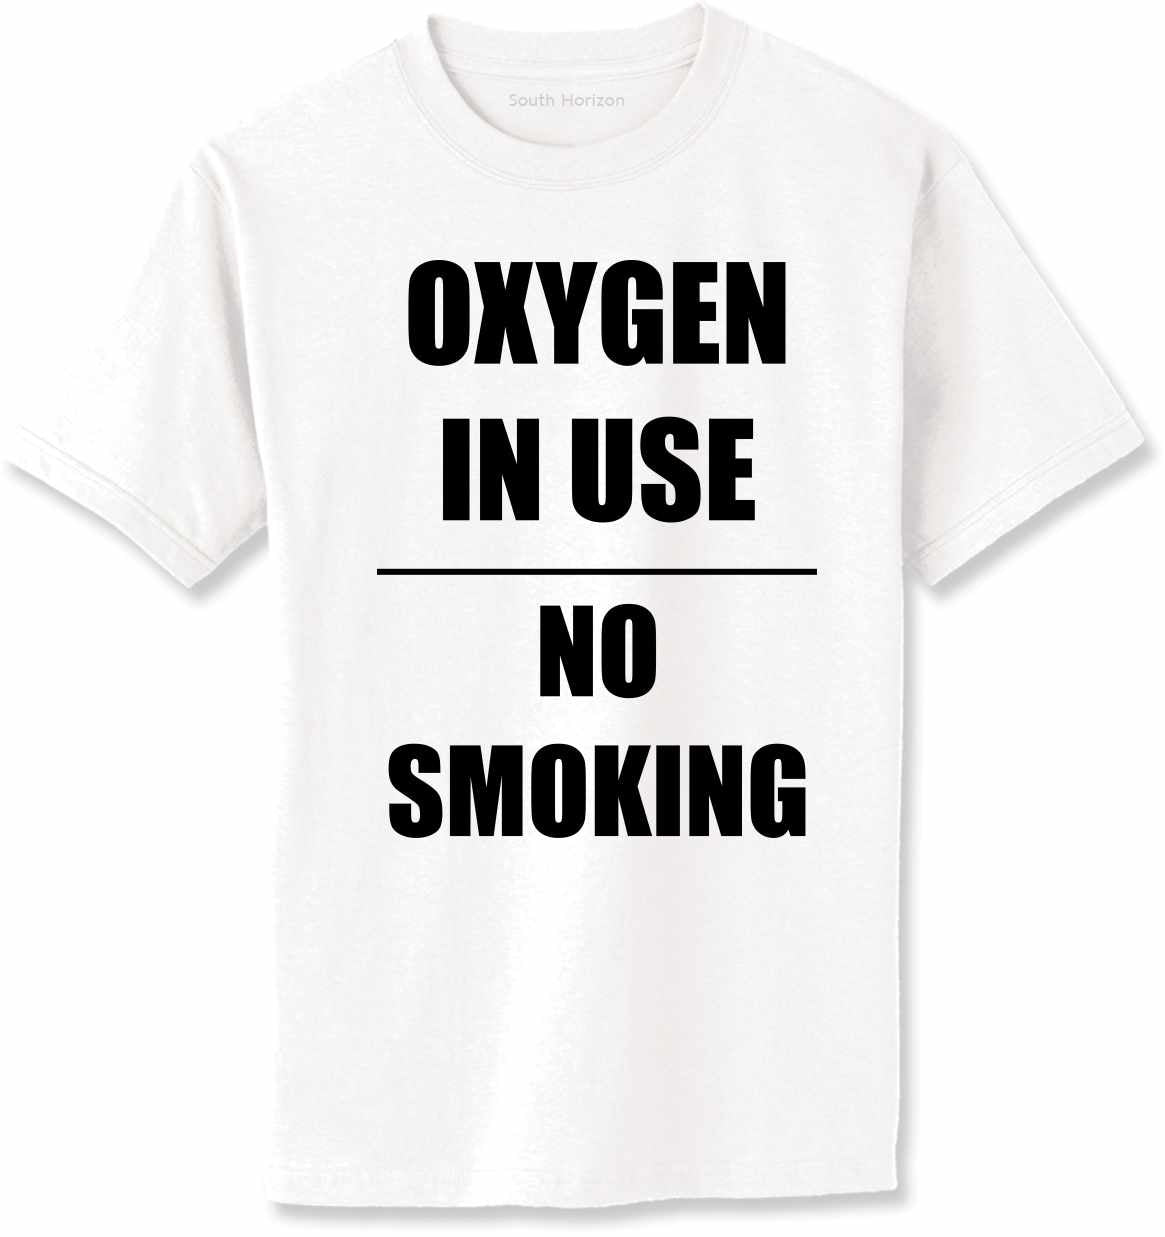 Oxygen In Use, No Smoking Adult T-Shirt (#1074-1)